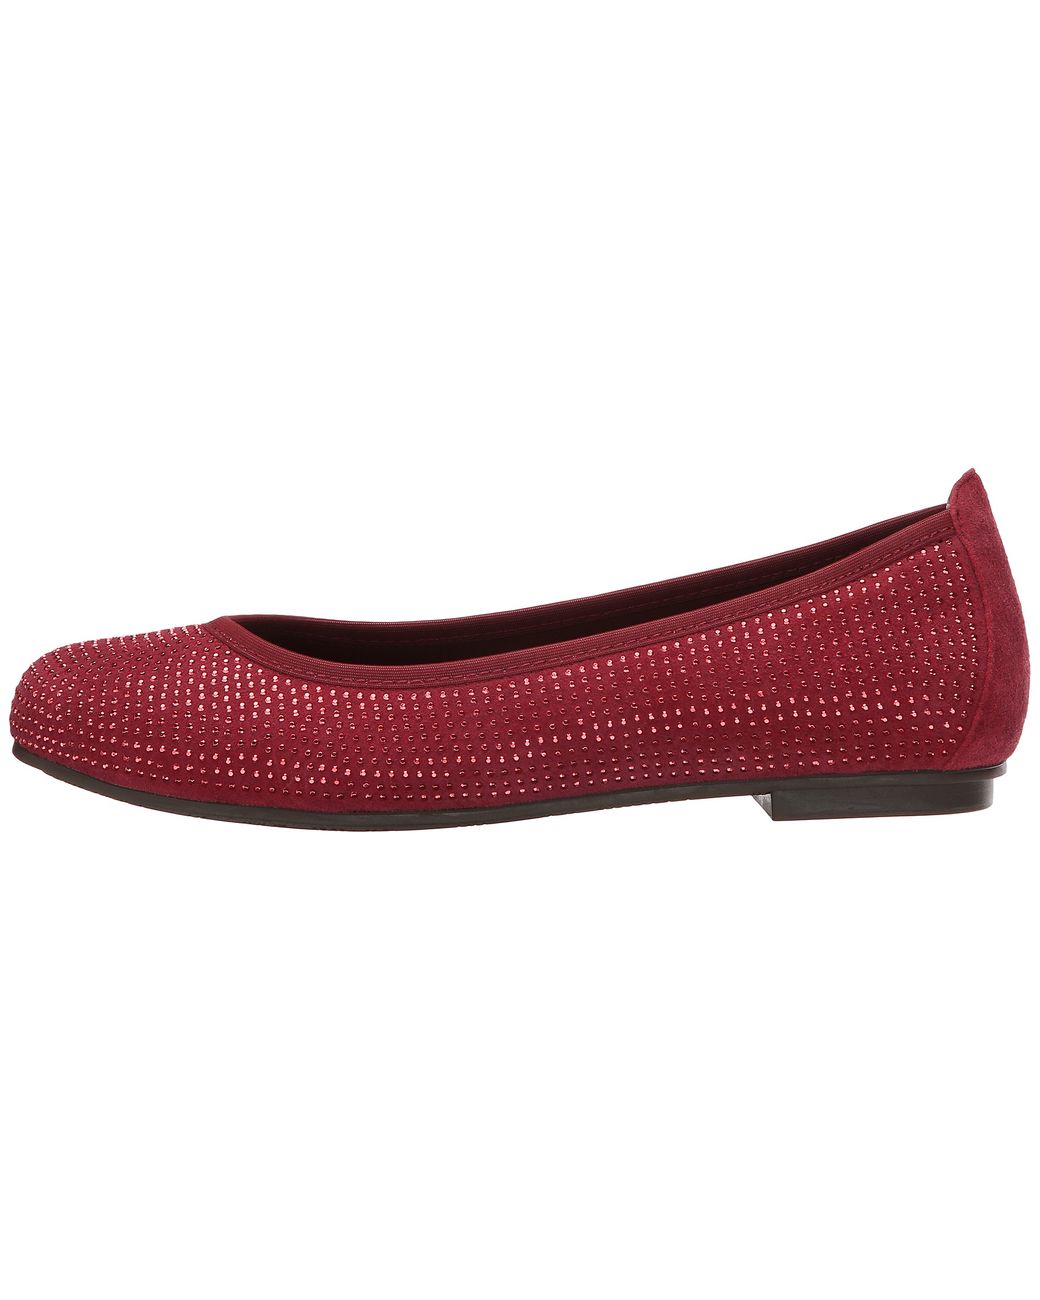 Details about   Vionic Spark Willow 359 Wine Ballet Flat with Orthaheel Technology Size 7 